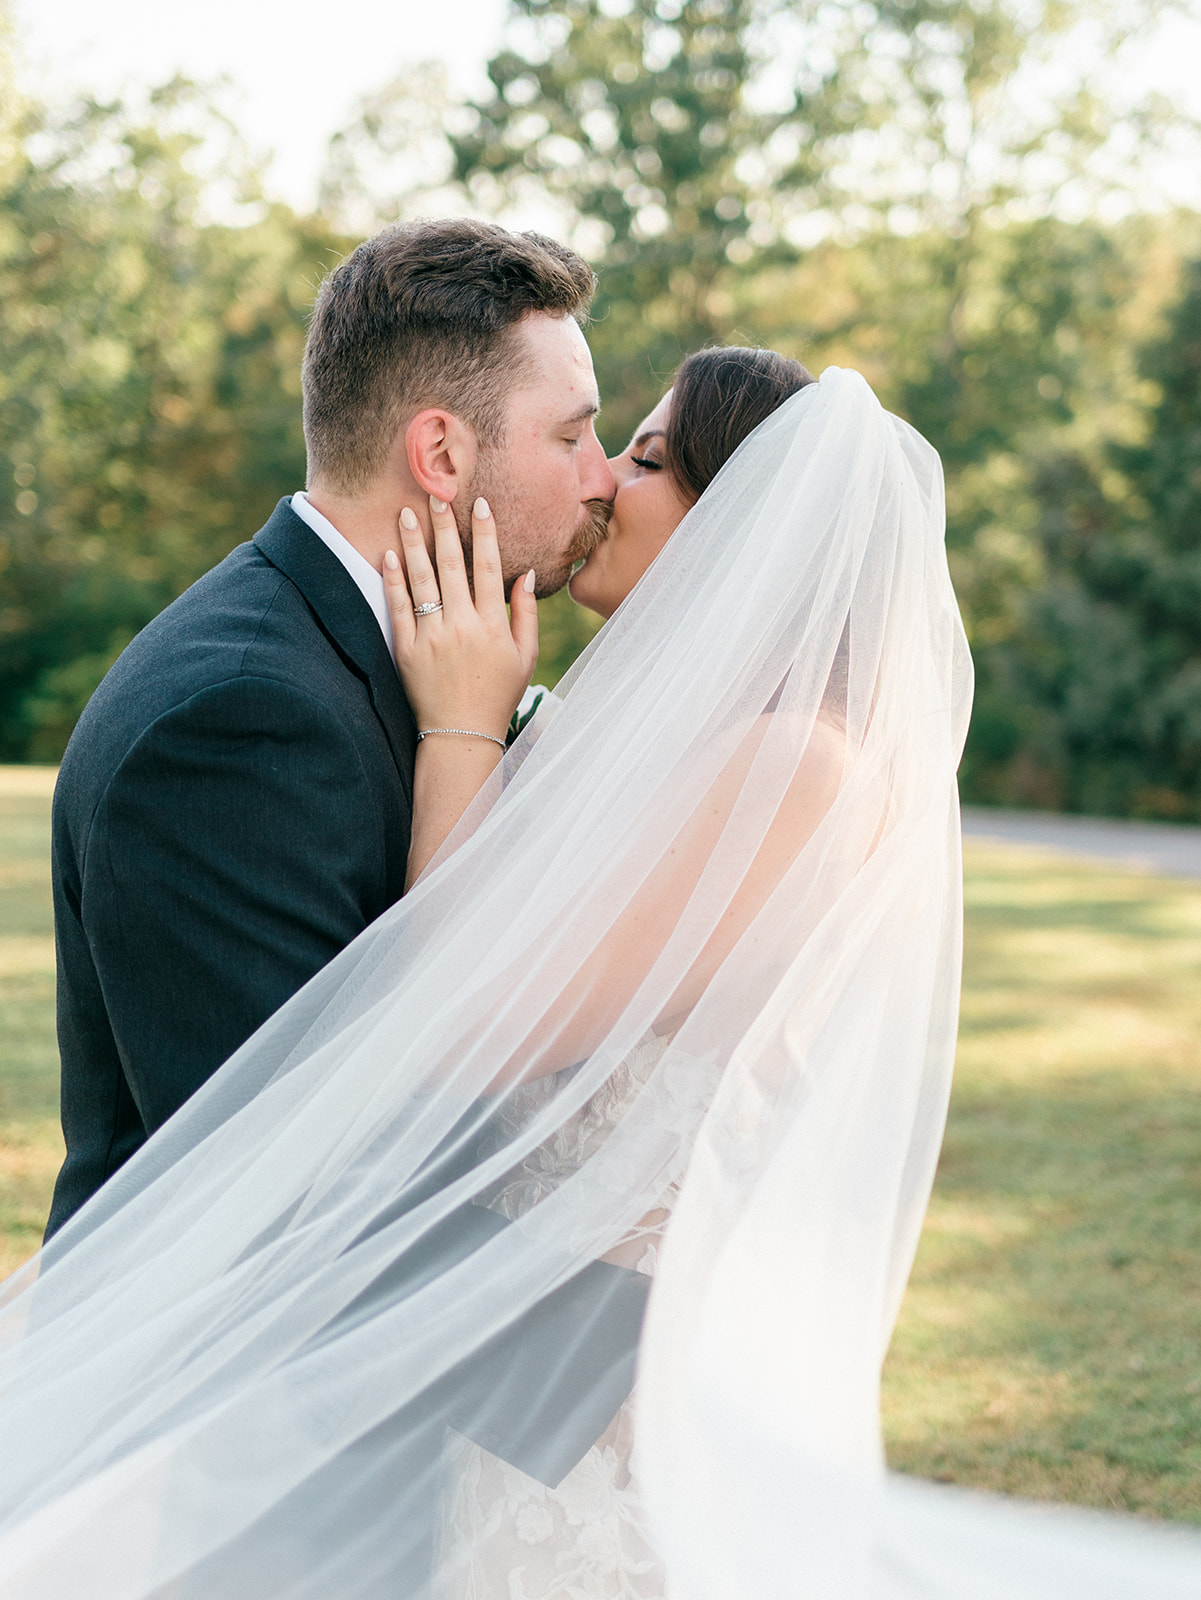 Newlyweds kiss while wrapped in a veil in a field at sunset